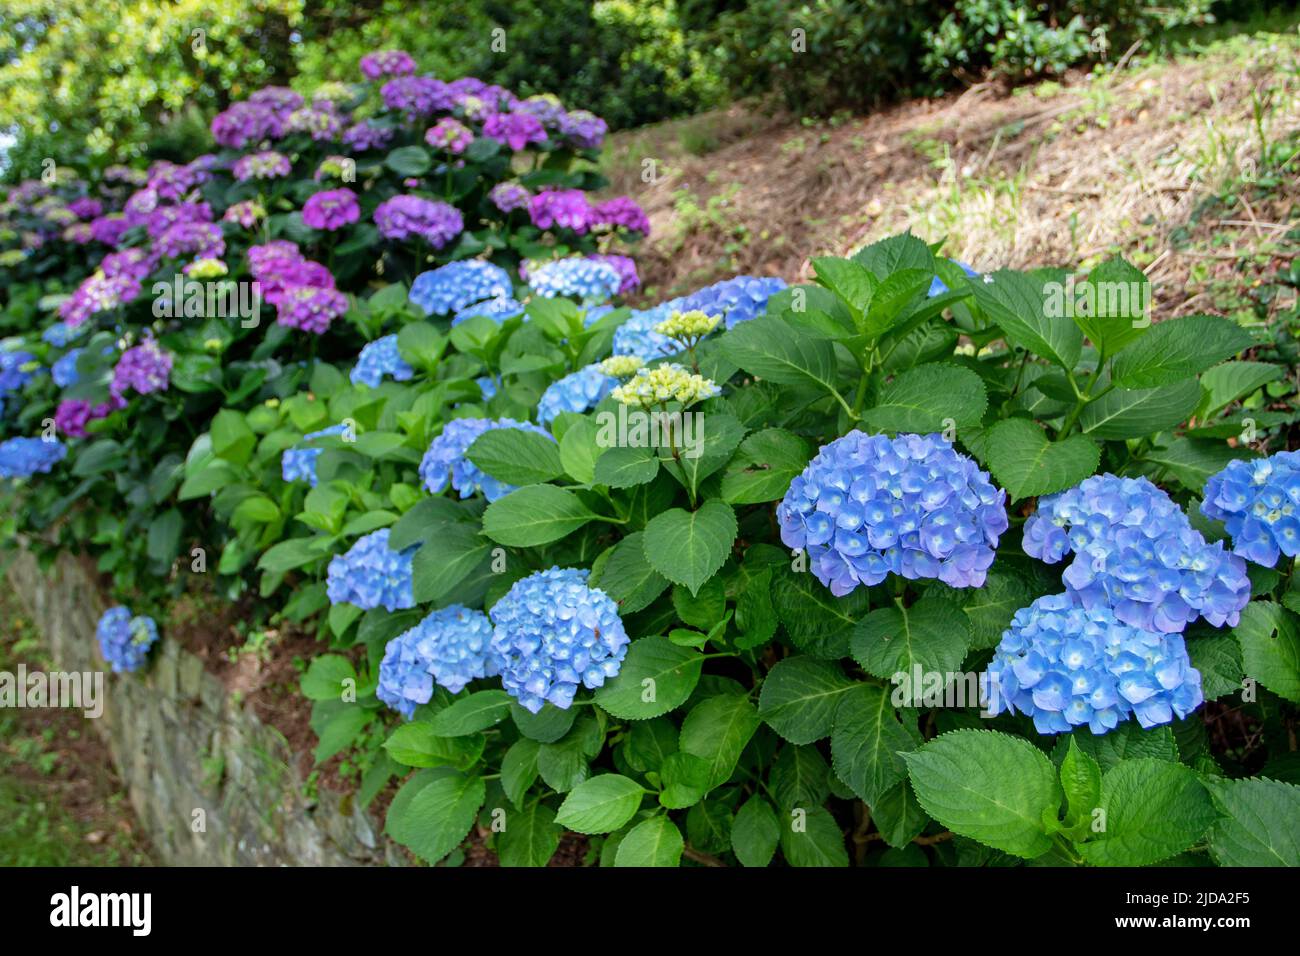 Blue and purple hortensia flowering shrubs hedge in the shady garden on the stone retaining wall. Hydrangea macrophylla flowering plants in Luarca,Ast Stock Photo